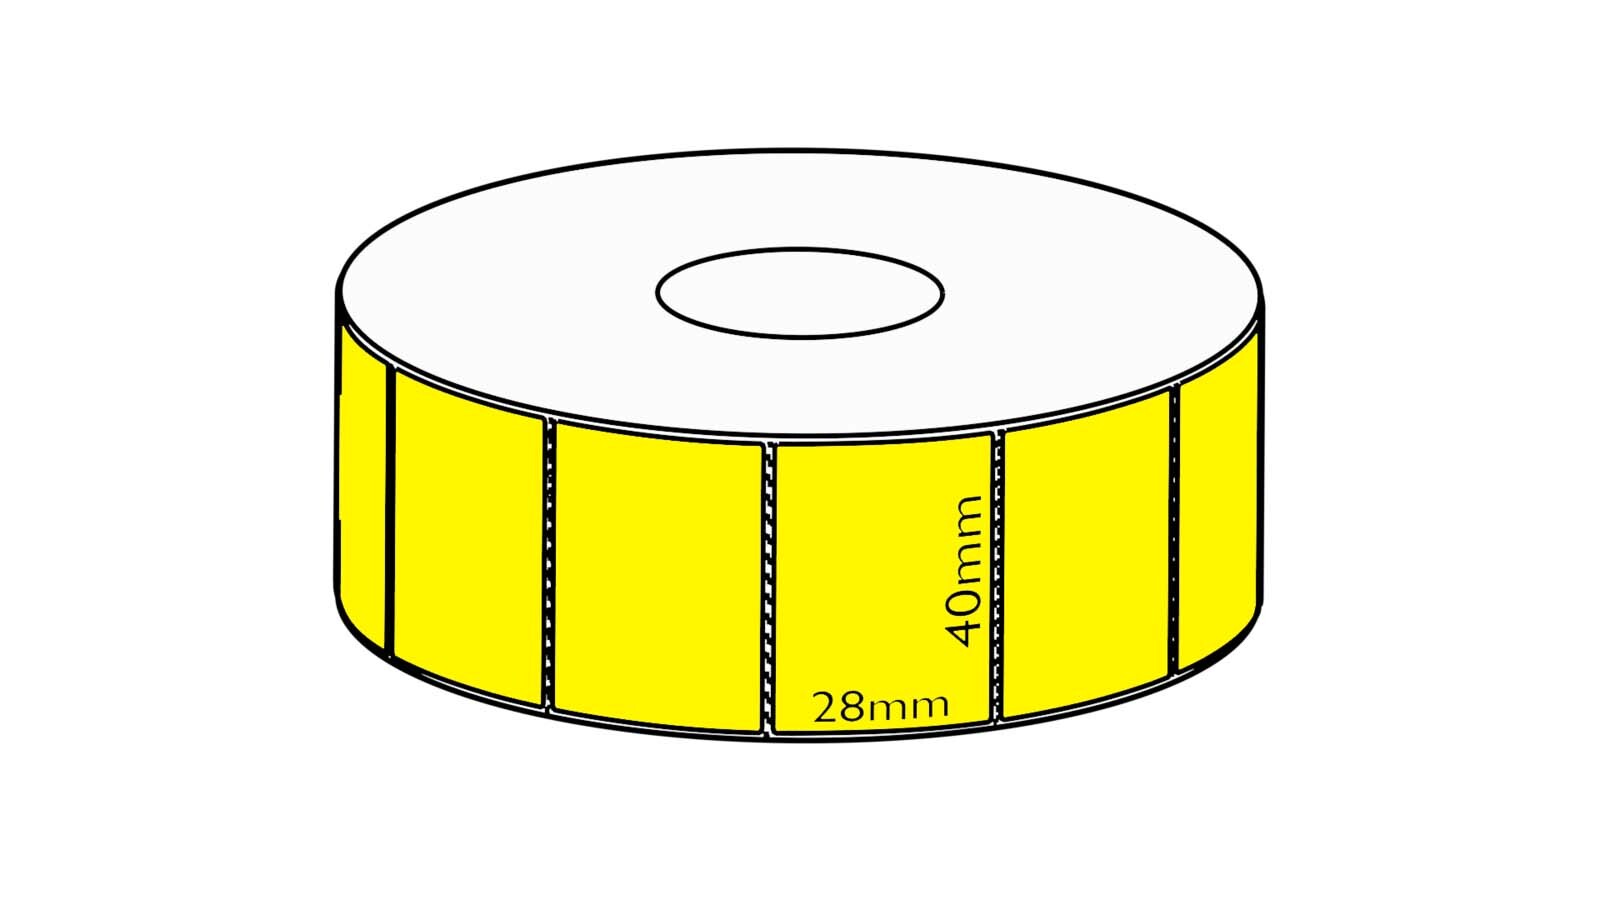 40x28mm Yellow Direct Thermal Permanent Label, 2000 per roll, 38mm core, Perforated